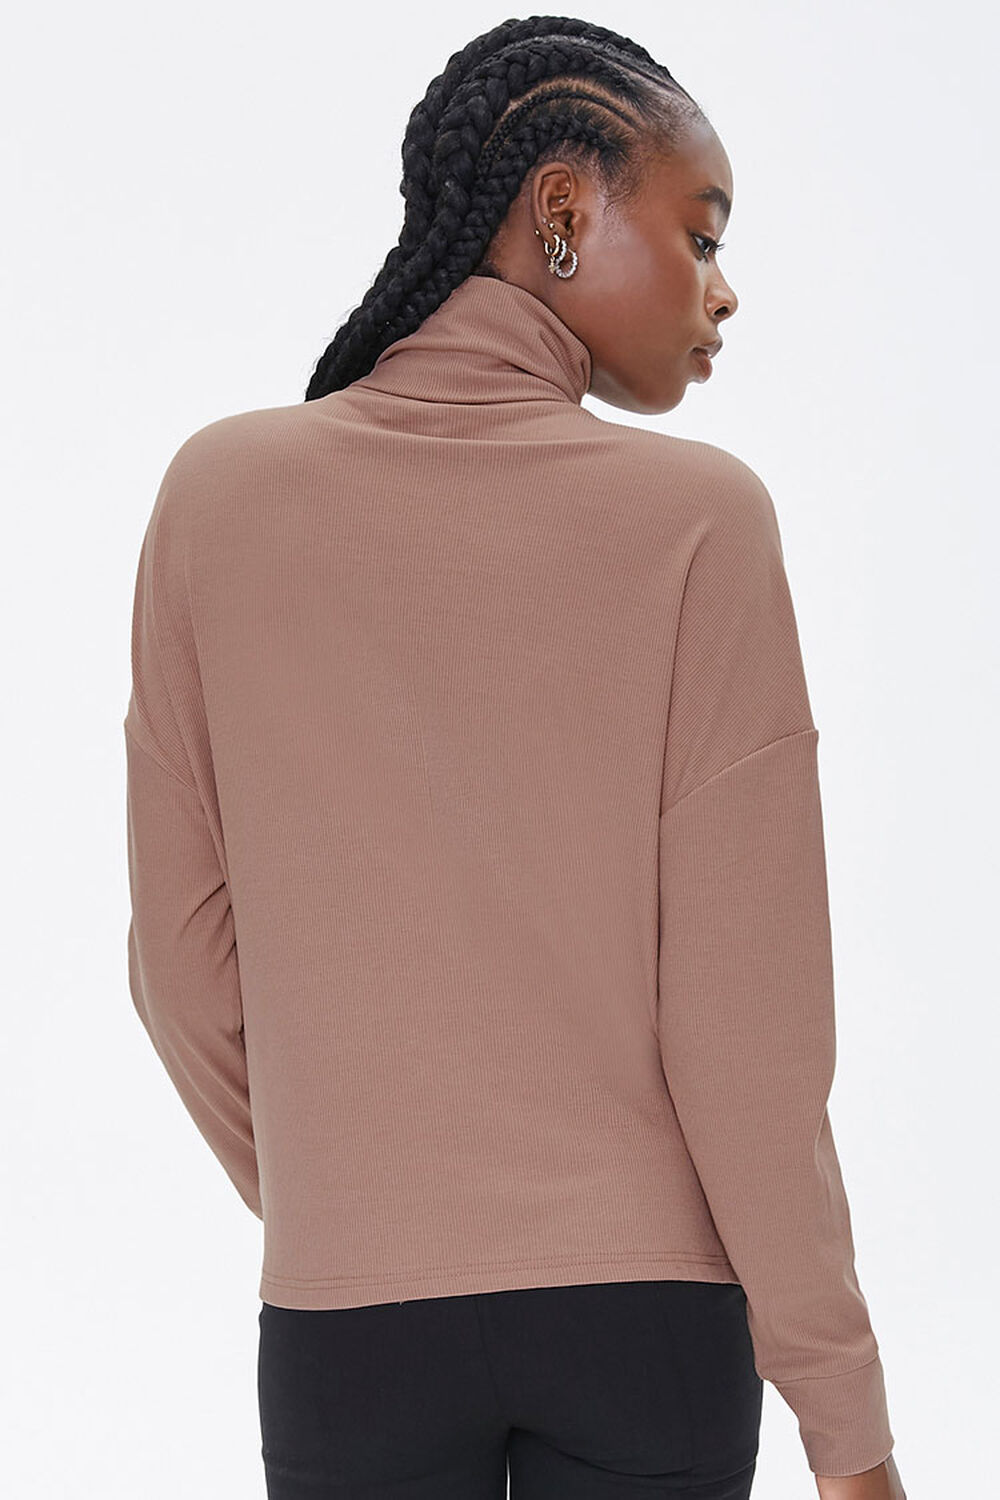 TAUPE Ribbed Turtleneck Top, image 3